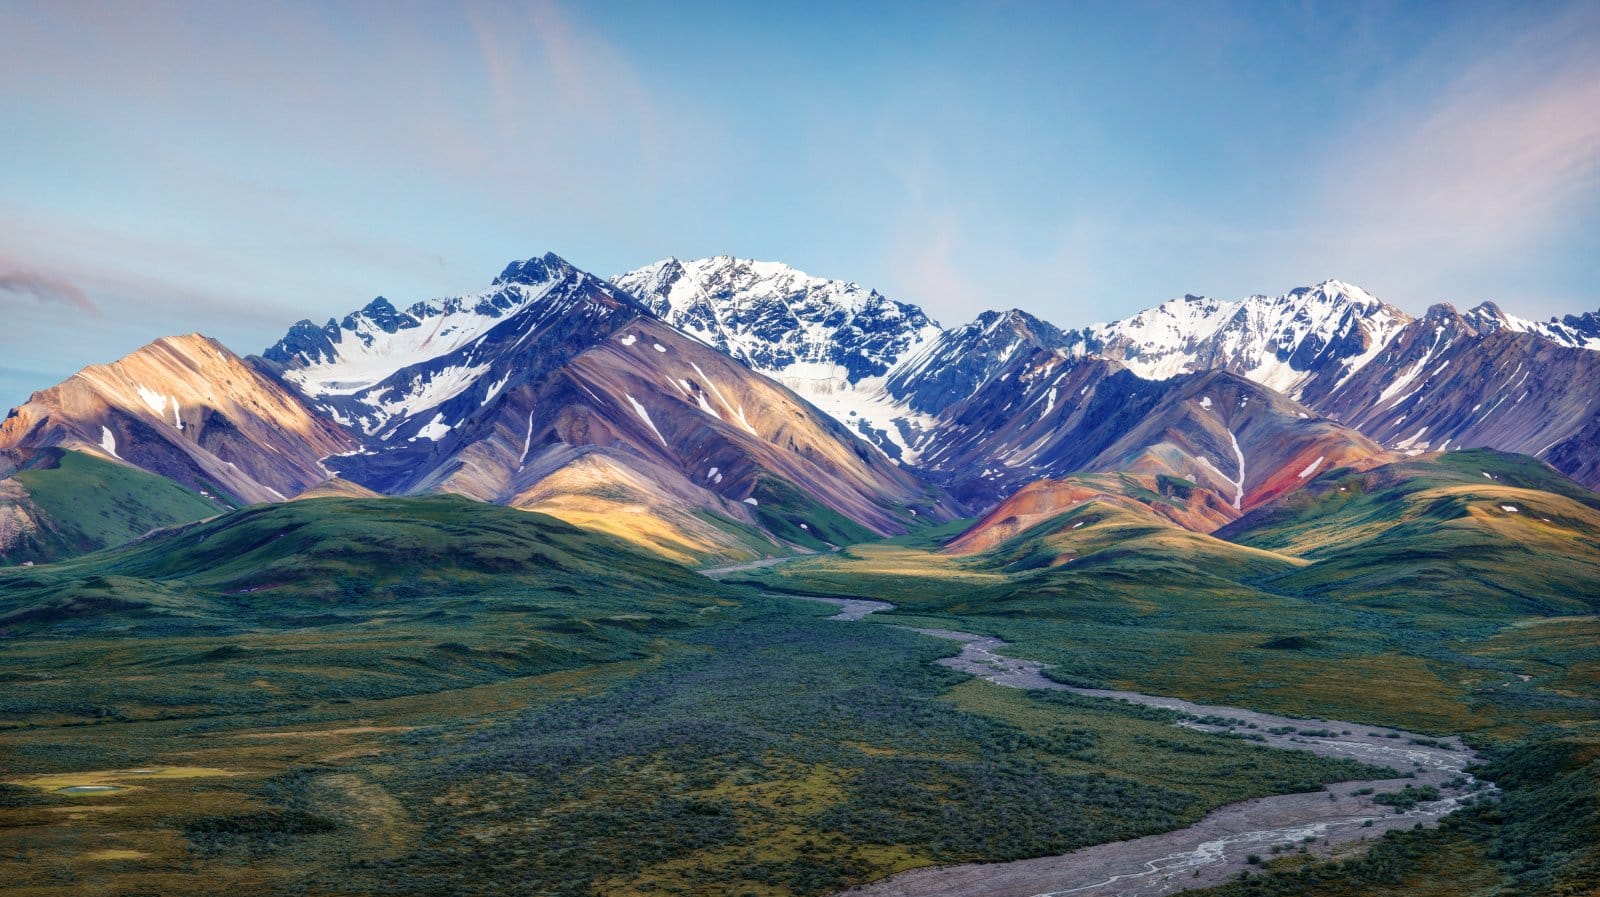 <p><span>Denali National Park offers more than just scenic landscapes; it connects profoundly to nature and wildlife. Plan a diverse itinerary to explore the park’s different facets and embrace the sense of wonder that Denali inspires.</span></p> <p><span>More Articles Like This…</span></p> <p><a href="https://thegreenvoyage.com/barcelona-discover-the-top-10-beach-clubs/"><span>Barcelona: Discover the Top 10 Beach Clubs</span></a></p> <p><a href="https://thegreenvoyage.com/top-destination-cities-to-visit/"><span>2024 Global City Travel Guide – Your Passport to the World’s Top Destination Cities</span></a></p> <p><a href="https://thegreenvoyage.com/exploring-khao-yai-a-hidden-gem-of-thailand/"><span>Exploring Khao Yai 2024 – A Hidden Gem of Thailand</span></a></p> <p><span>The post <a href="https://passingthru.com/denali-adventure-a-day-of-discovery/">Denali Adventure – A Day of Discovery in Alaska’s Majestic National Park</a> republished on </span><a href="https://passingthru.com/"><span>Passing Thru</span></a><span> with permission from </span><a href="https://thegreenvoyage.com/"><span>The Green Voyage</span></a><span>.</span></p> <p><span>Featured Image Credit: Shutterstock / attilio pregnolato.</span></p>